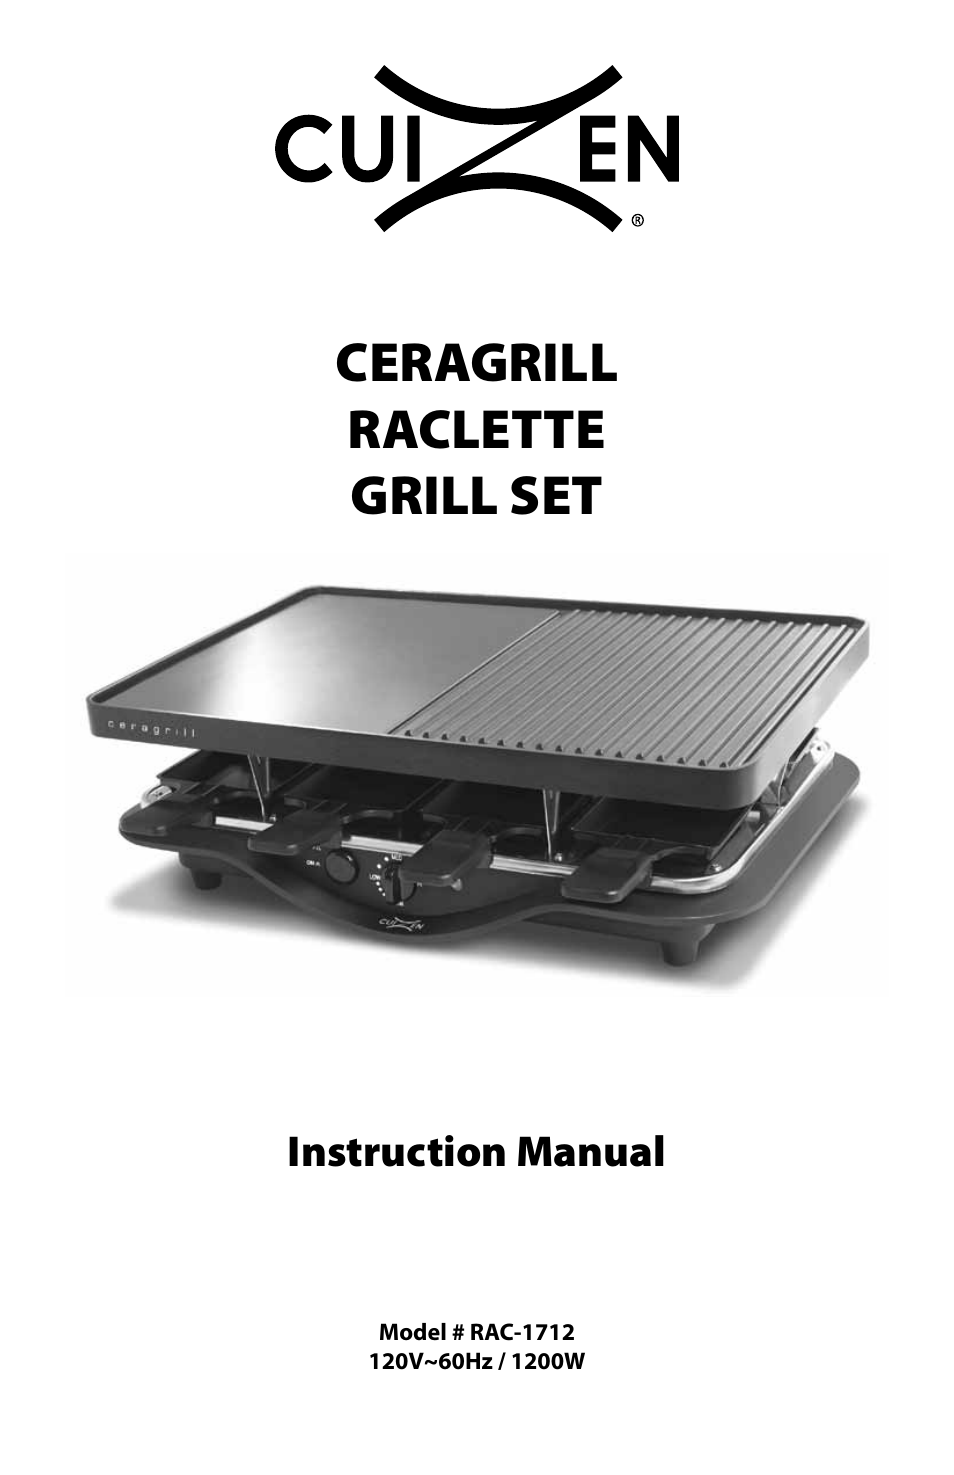 Ceragrill Raclette Grill